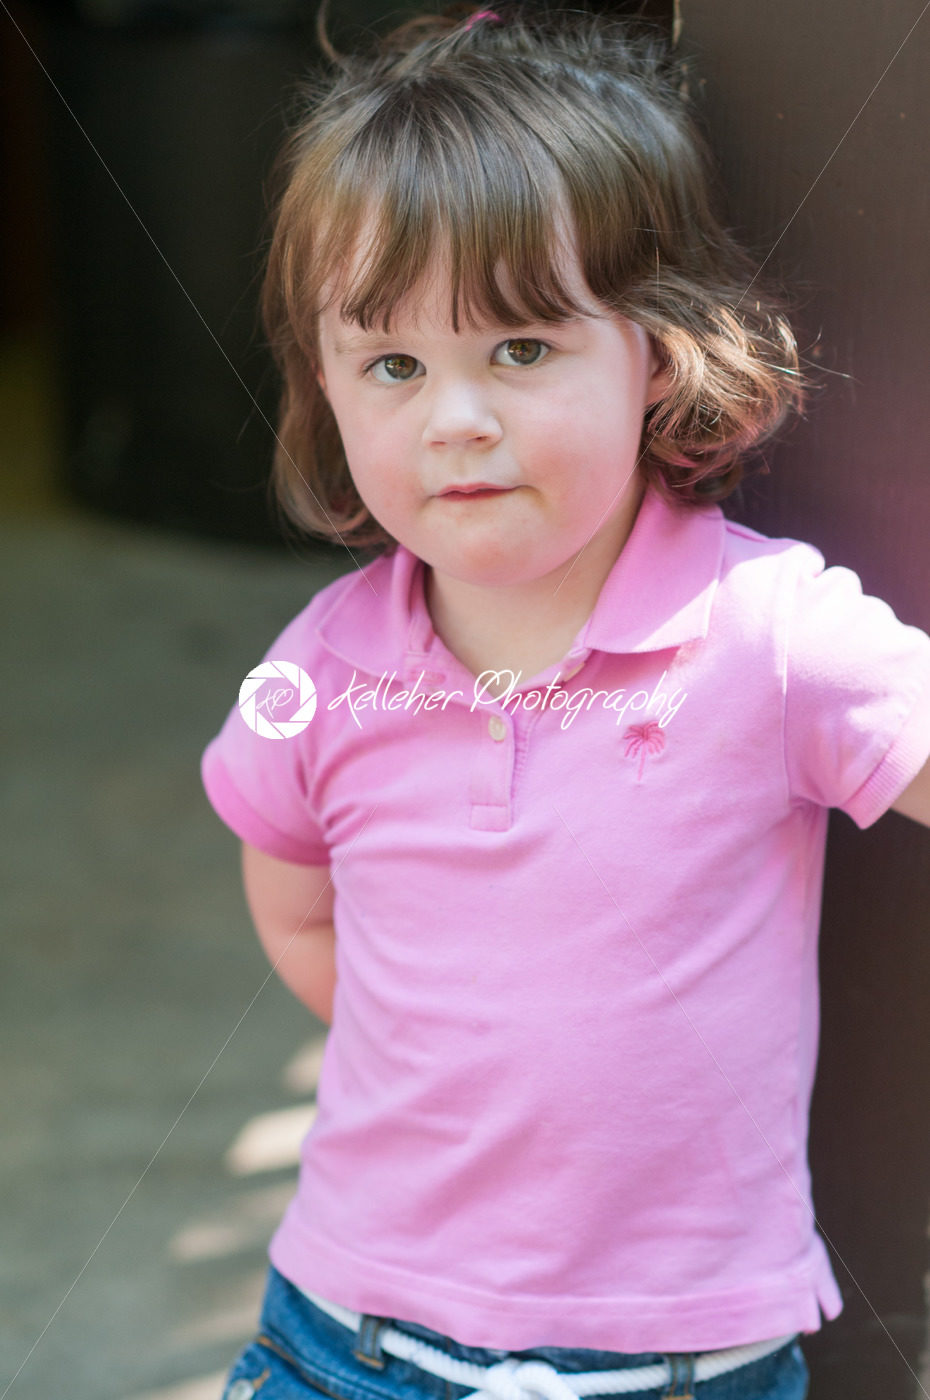 Close up Portrait of young girl at sunset - Kelleher Photography Store